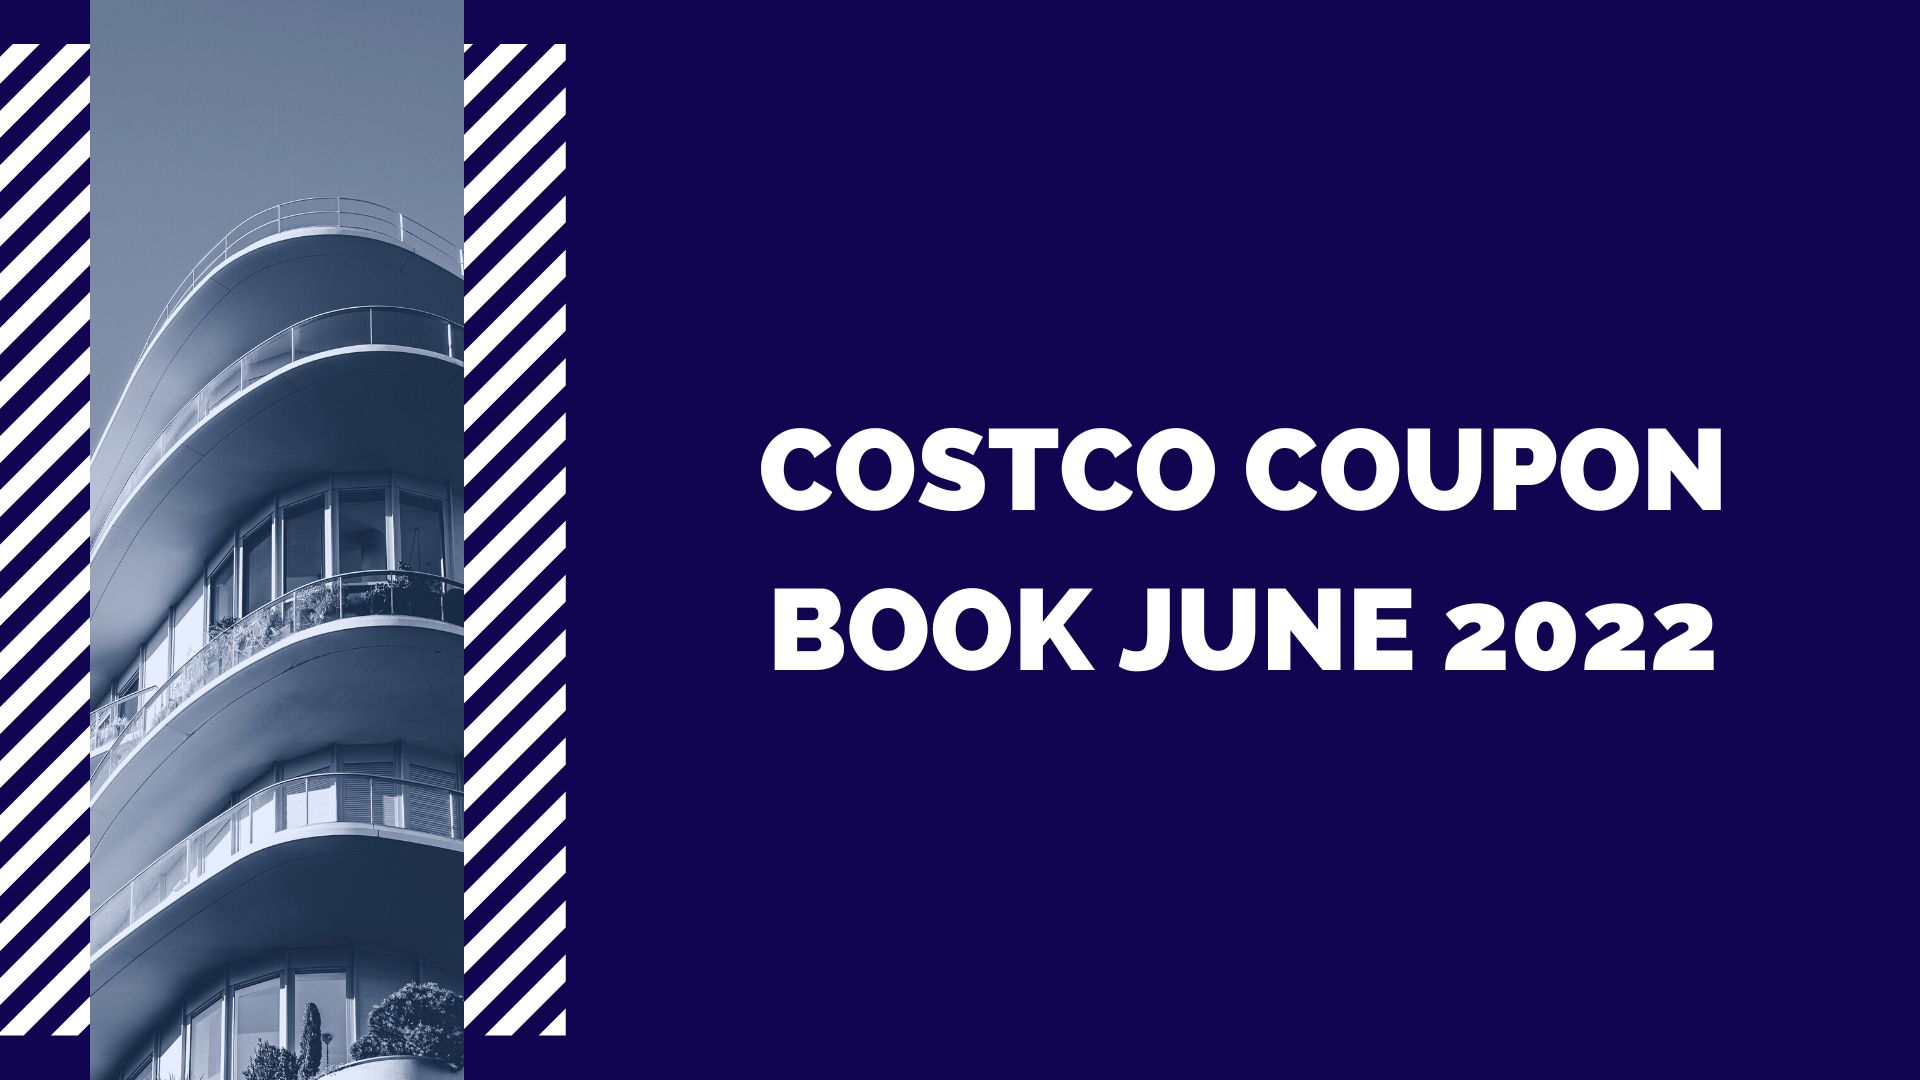 Costco Coupon Book June 2022 {June} Check The Latest News Here!